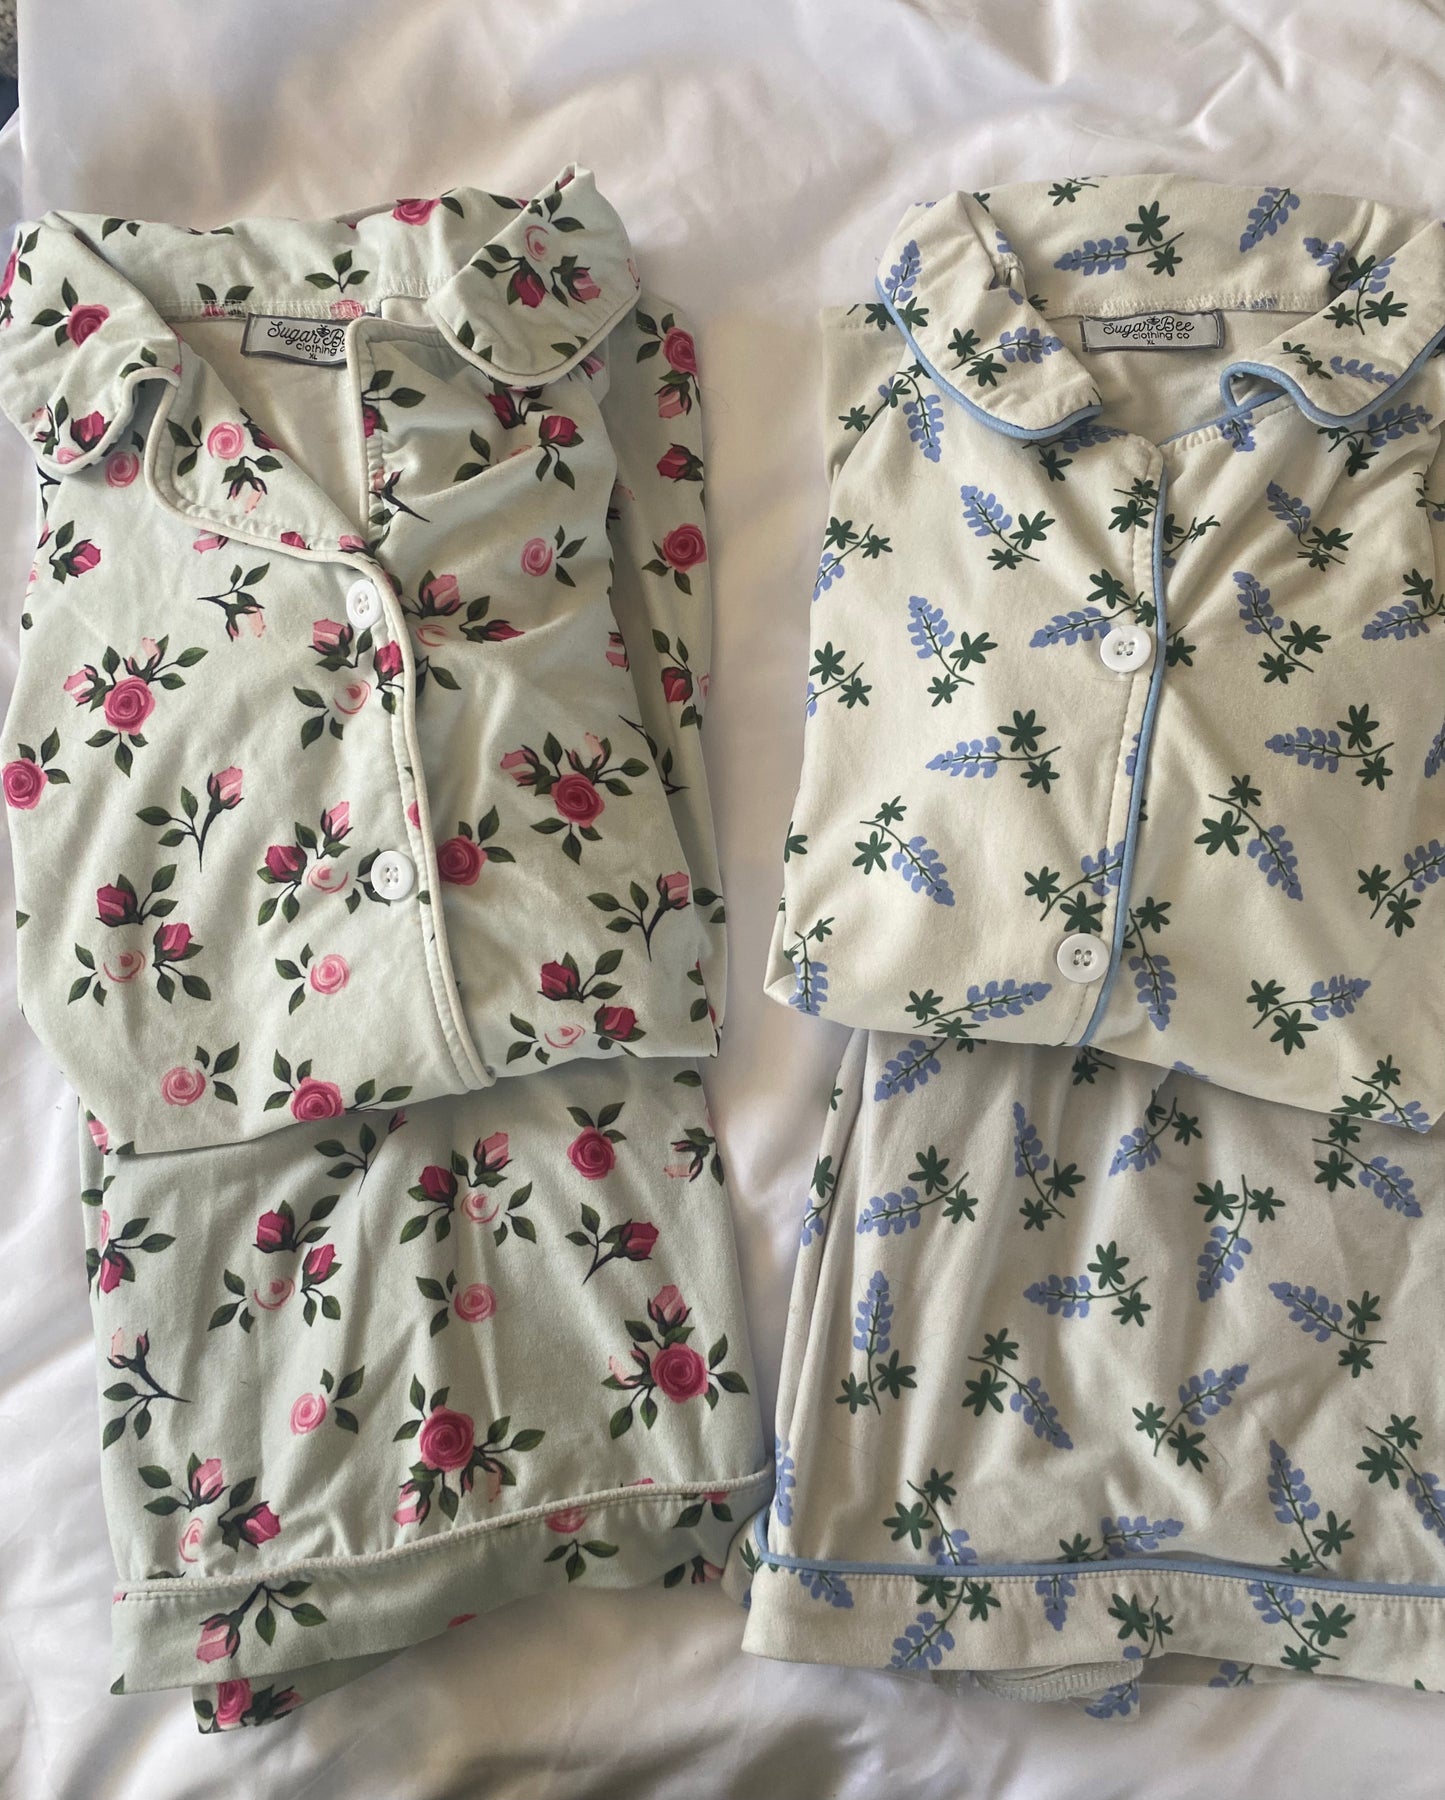 Sugar Bee Boutique pjs size XL 2 pairs